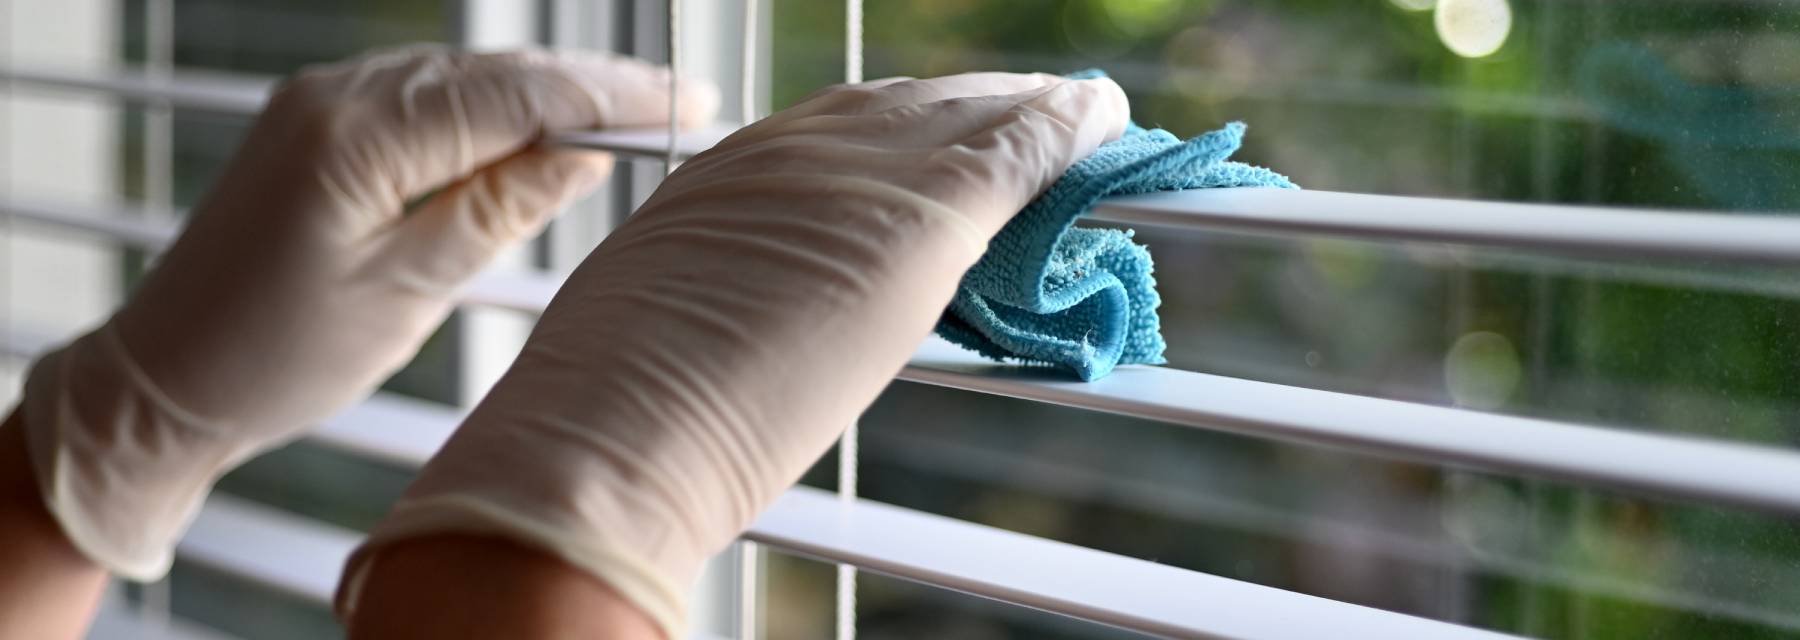 Blind cleaning technician wearing white gloves and cleaning white blinds